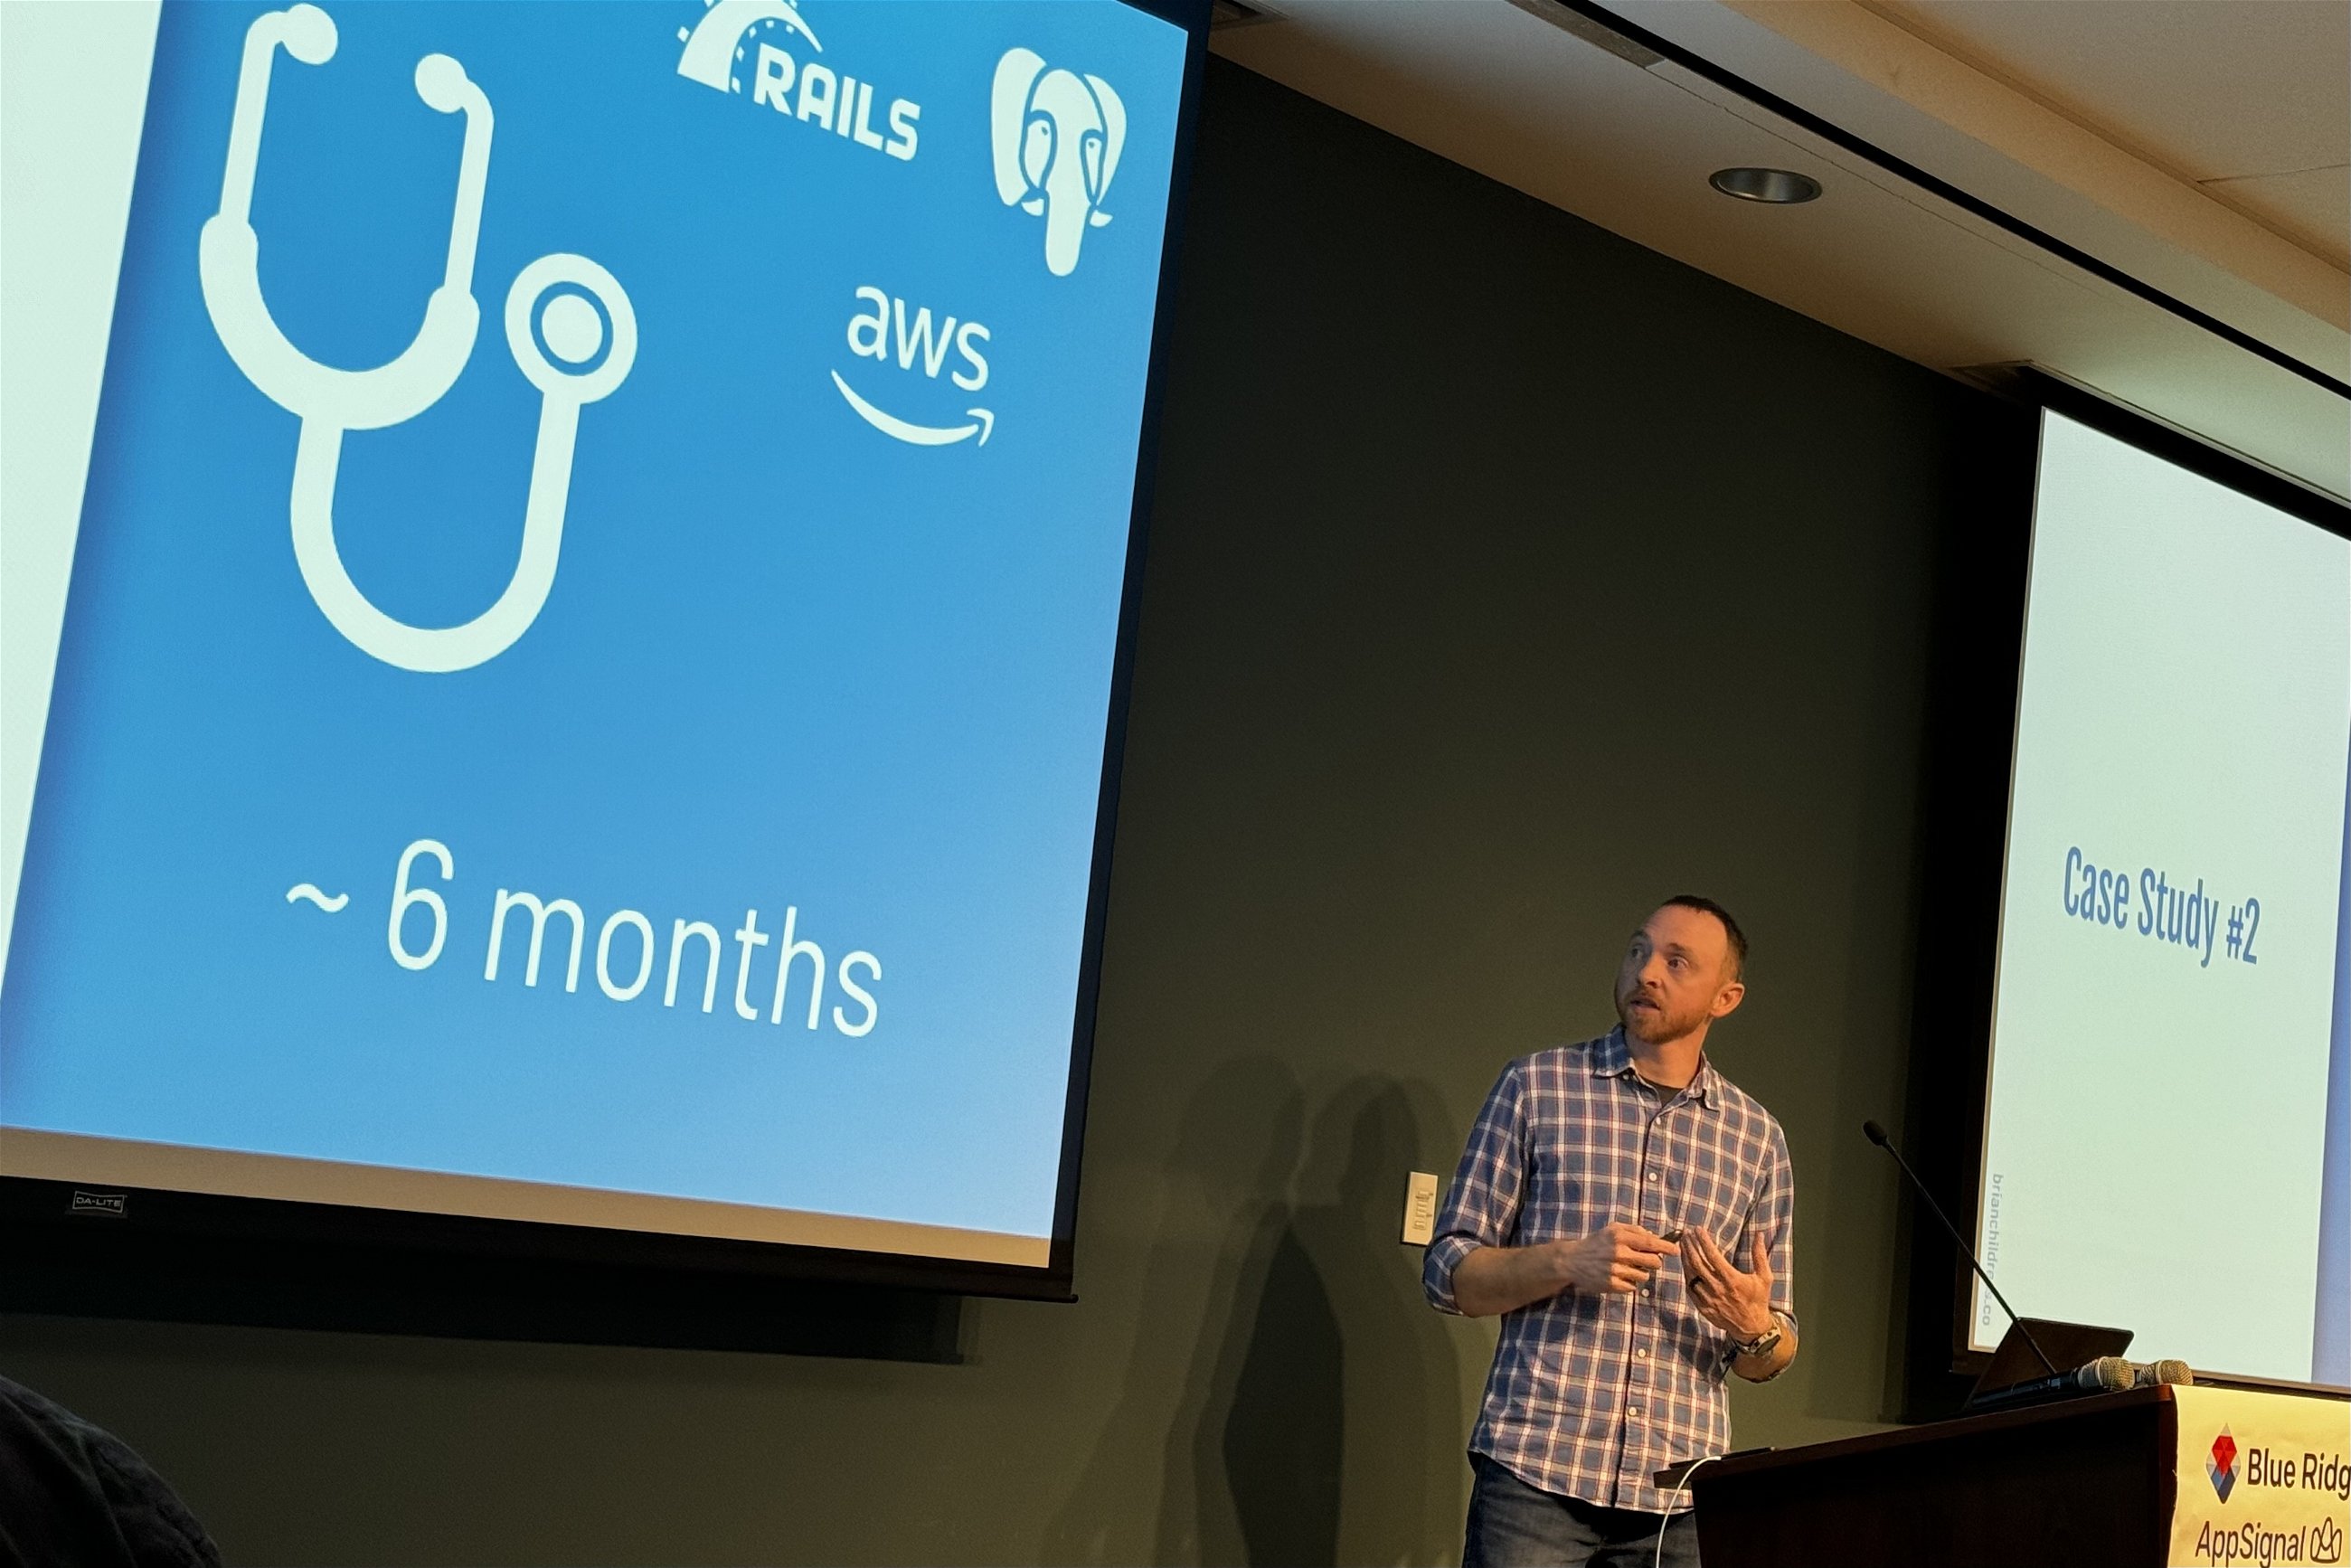 Brian Childress at Blue Ridge Ruby conference discussing a case study related to Rails and AWS, indicated by icons on a slide that reads "~ 6 months", standing beside a podium with a Blue Ridge Ruby conference banner.